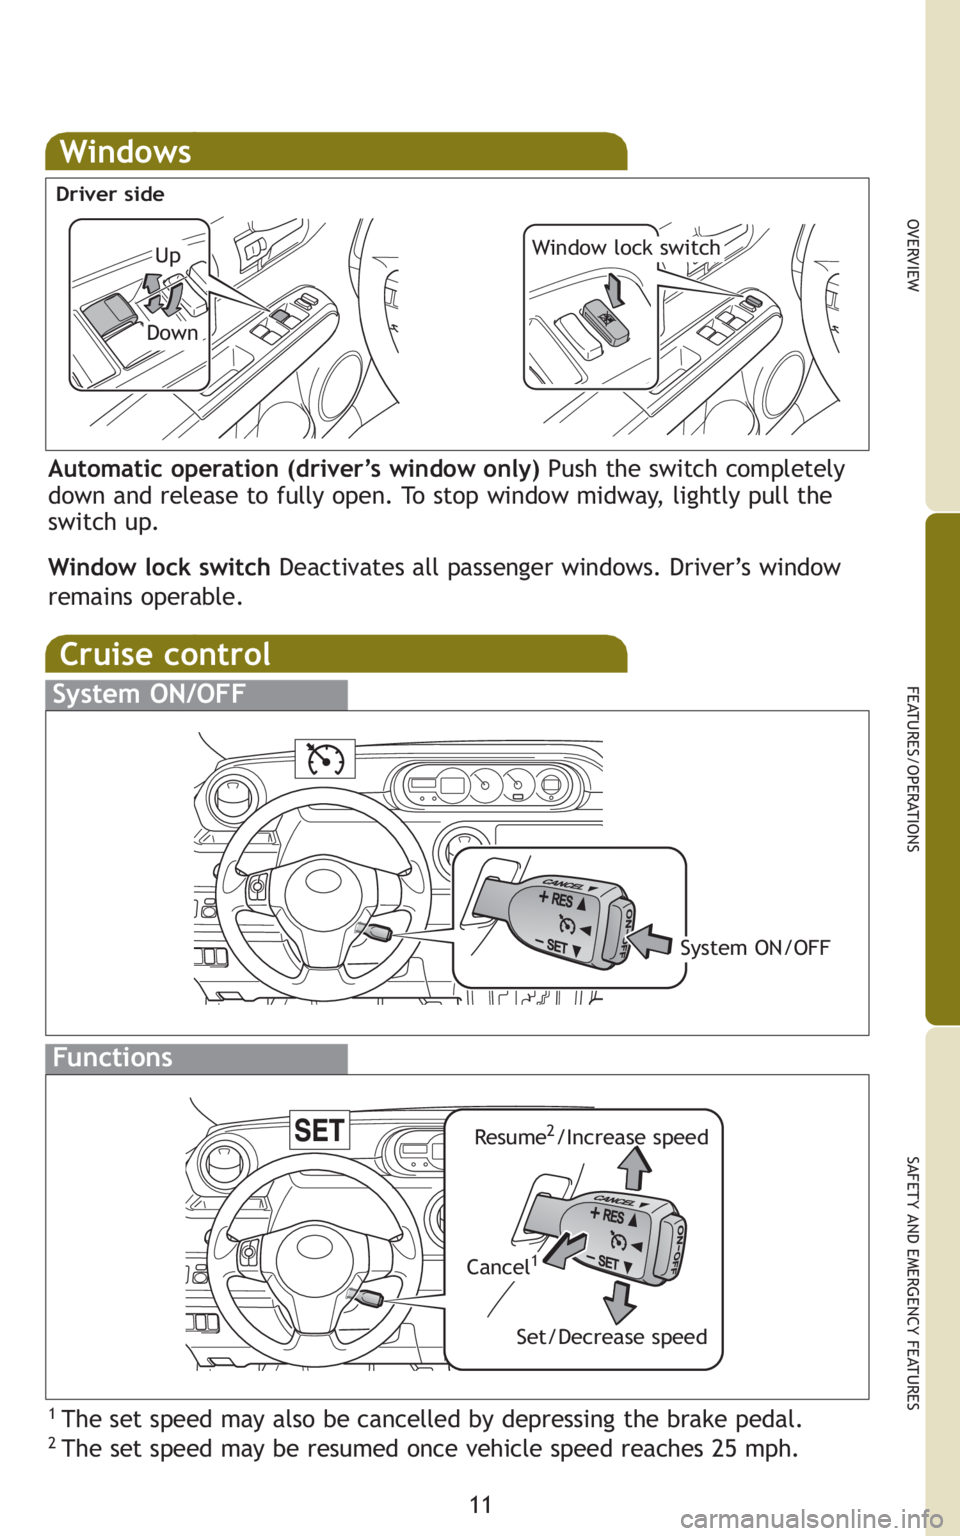 TOYOTA xB 2011  Owners Manual (in English) 11
OVERVIEW
FEATURES/OPERATIONS
SAFETY AND EMERGENCY FEATURES
Windows
Automatic operation (driver’s window only) Push the switch completely
down and release to fully open. To stop window midway, lig